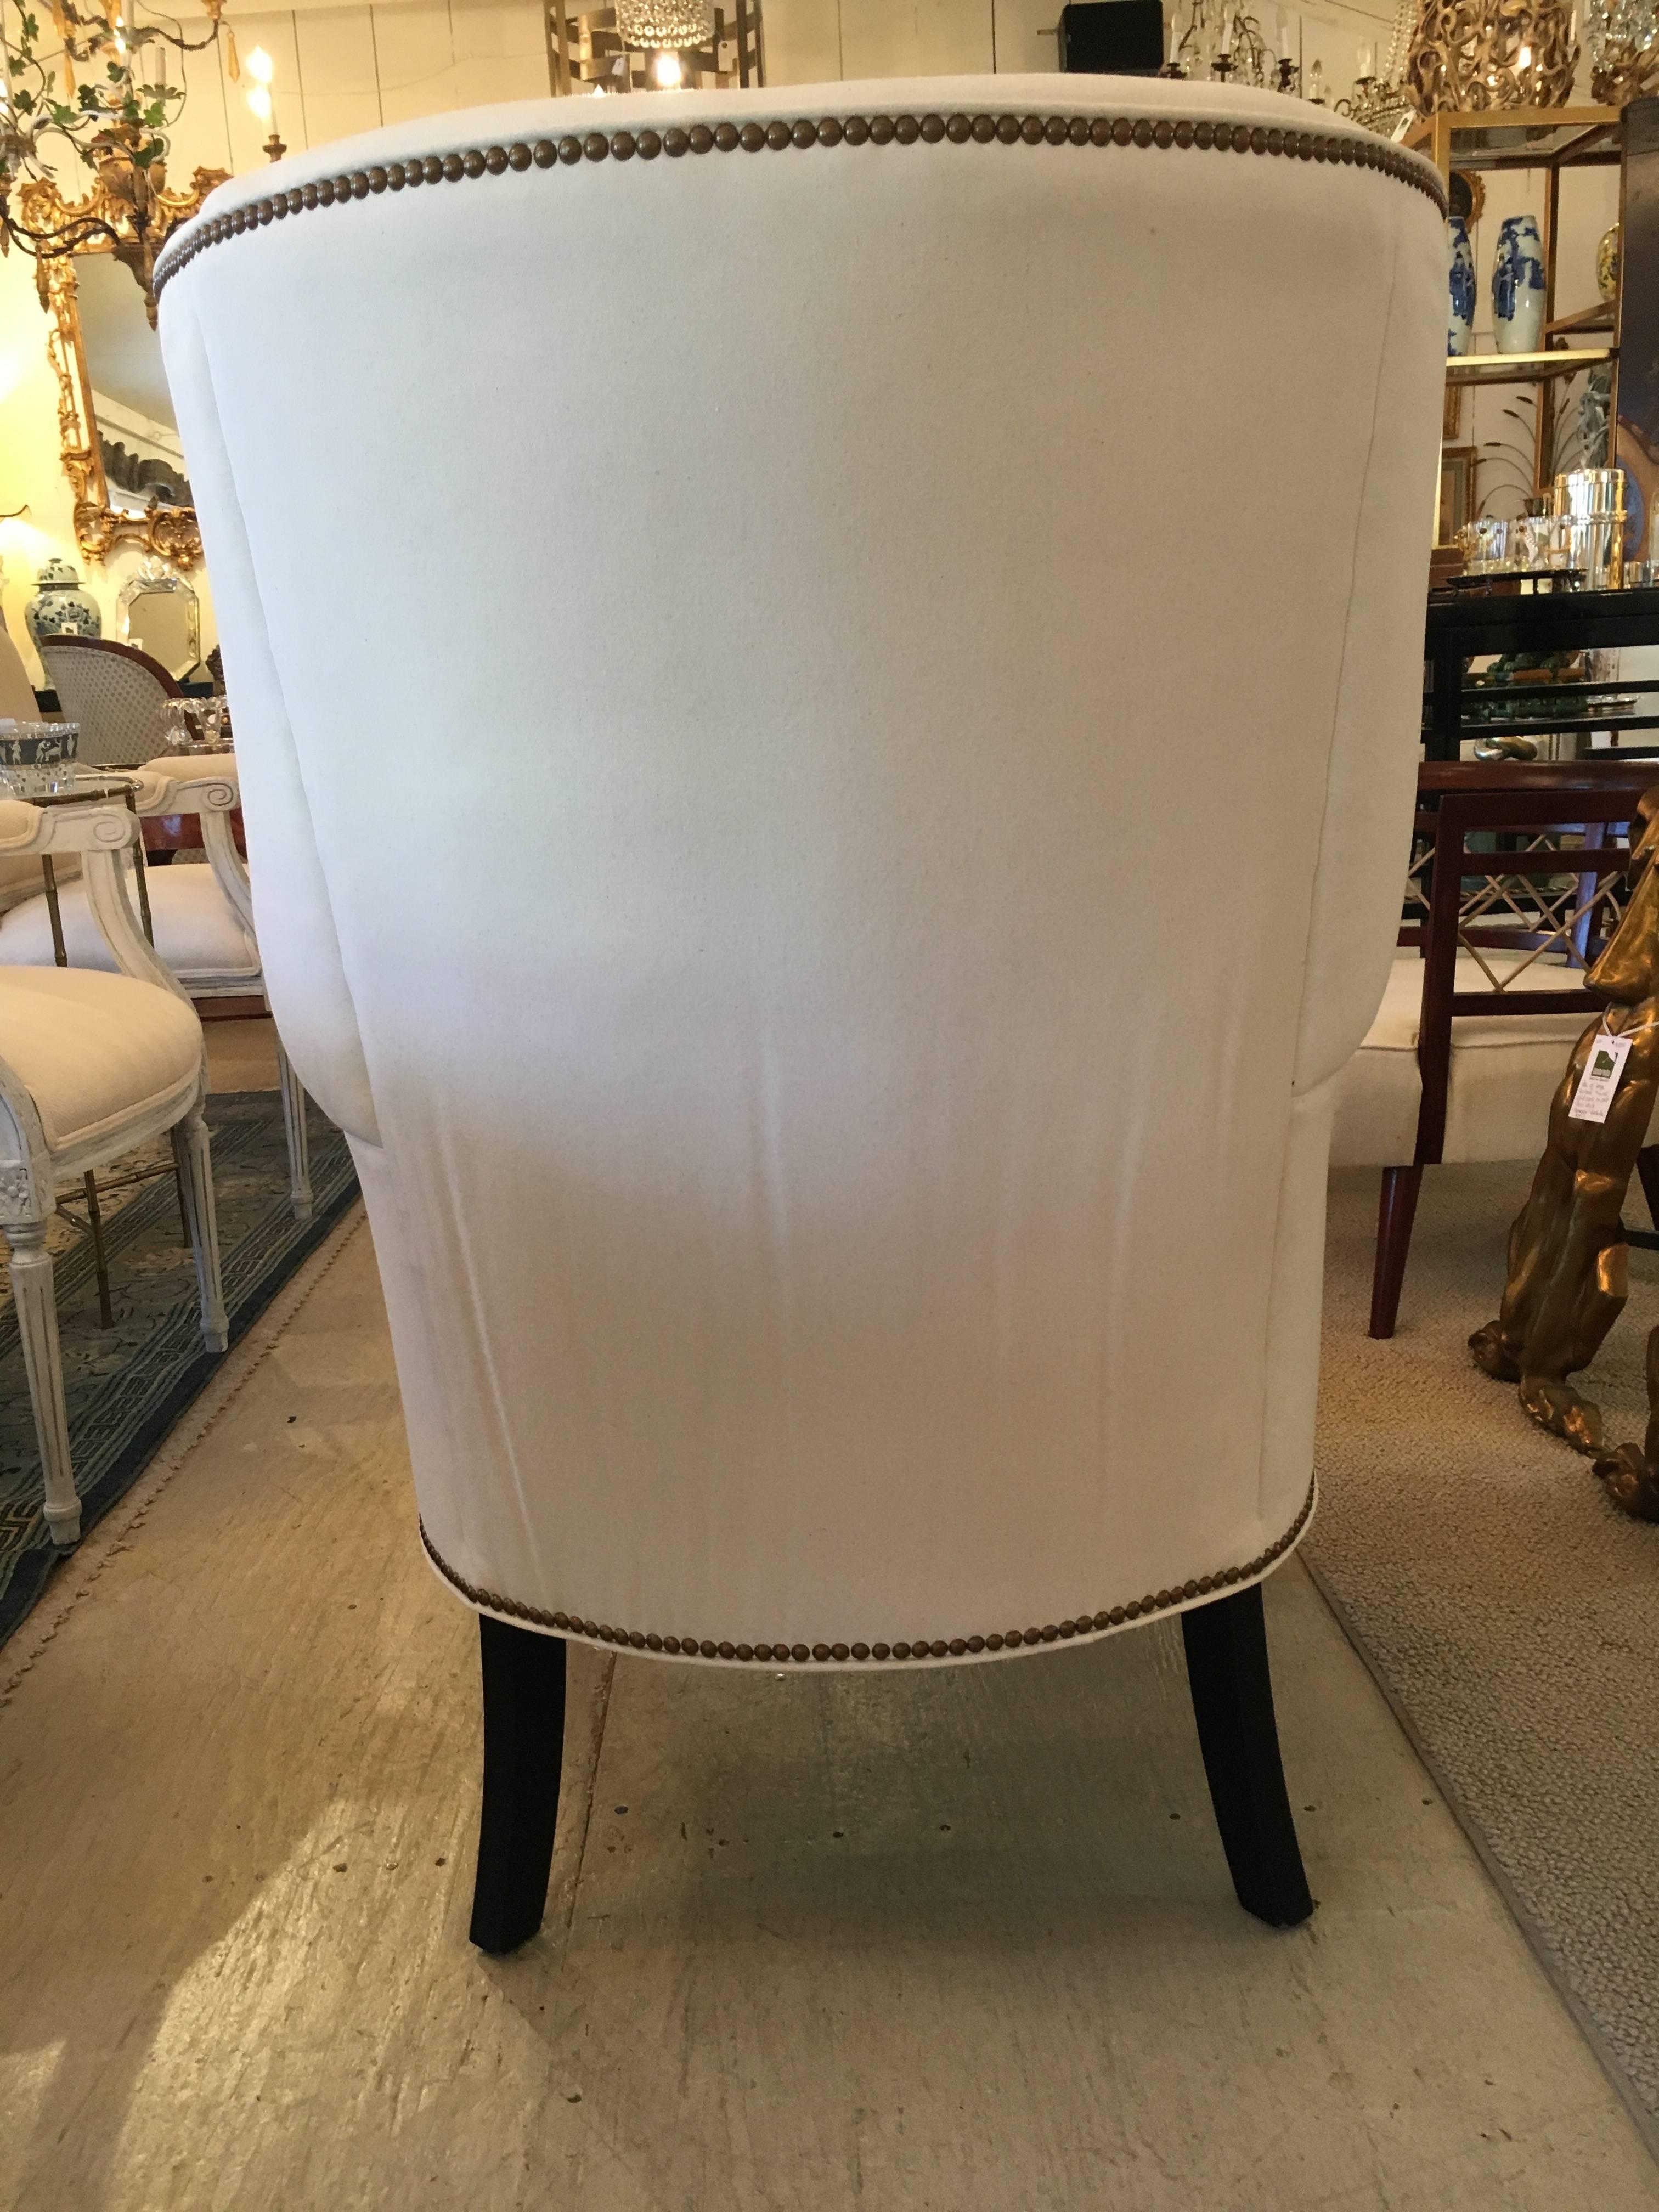 Sophisticated pair of wing chairs with ebonized legs, newly upholstered in white cotton duck and French brass nailheads.  Seat depth 21.5". Arm height is 26". 
